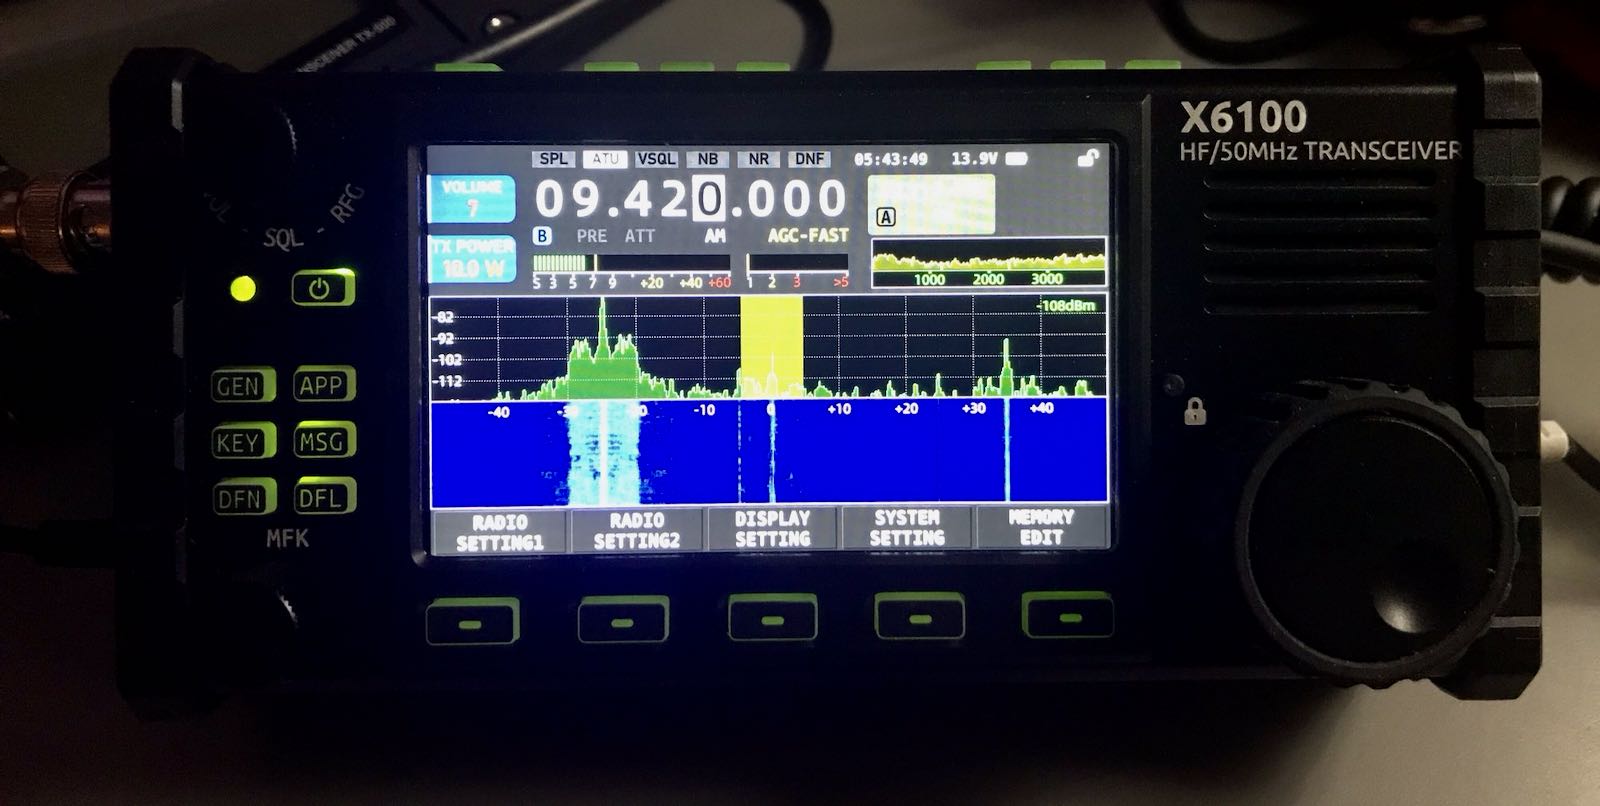 The new Xiegu X6100 Is it a good SW/MW broadcast band receiver? The SWLing Post